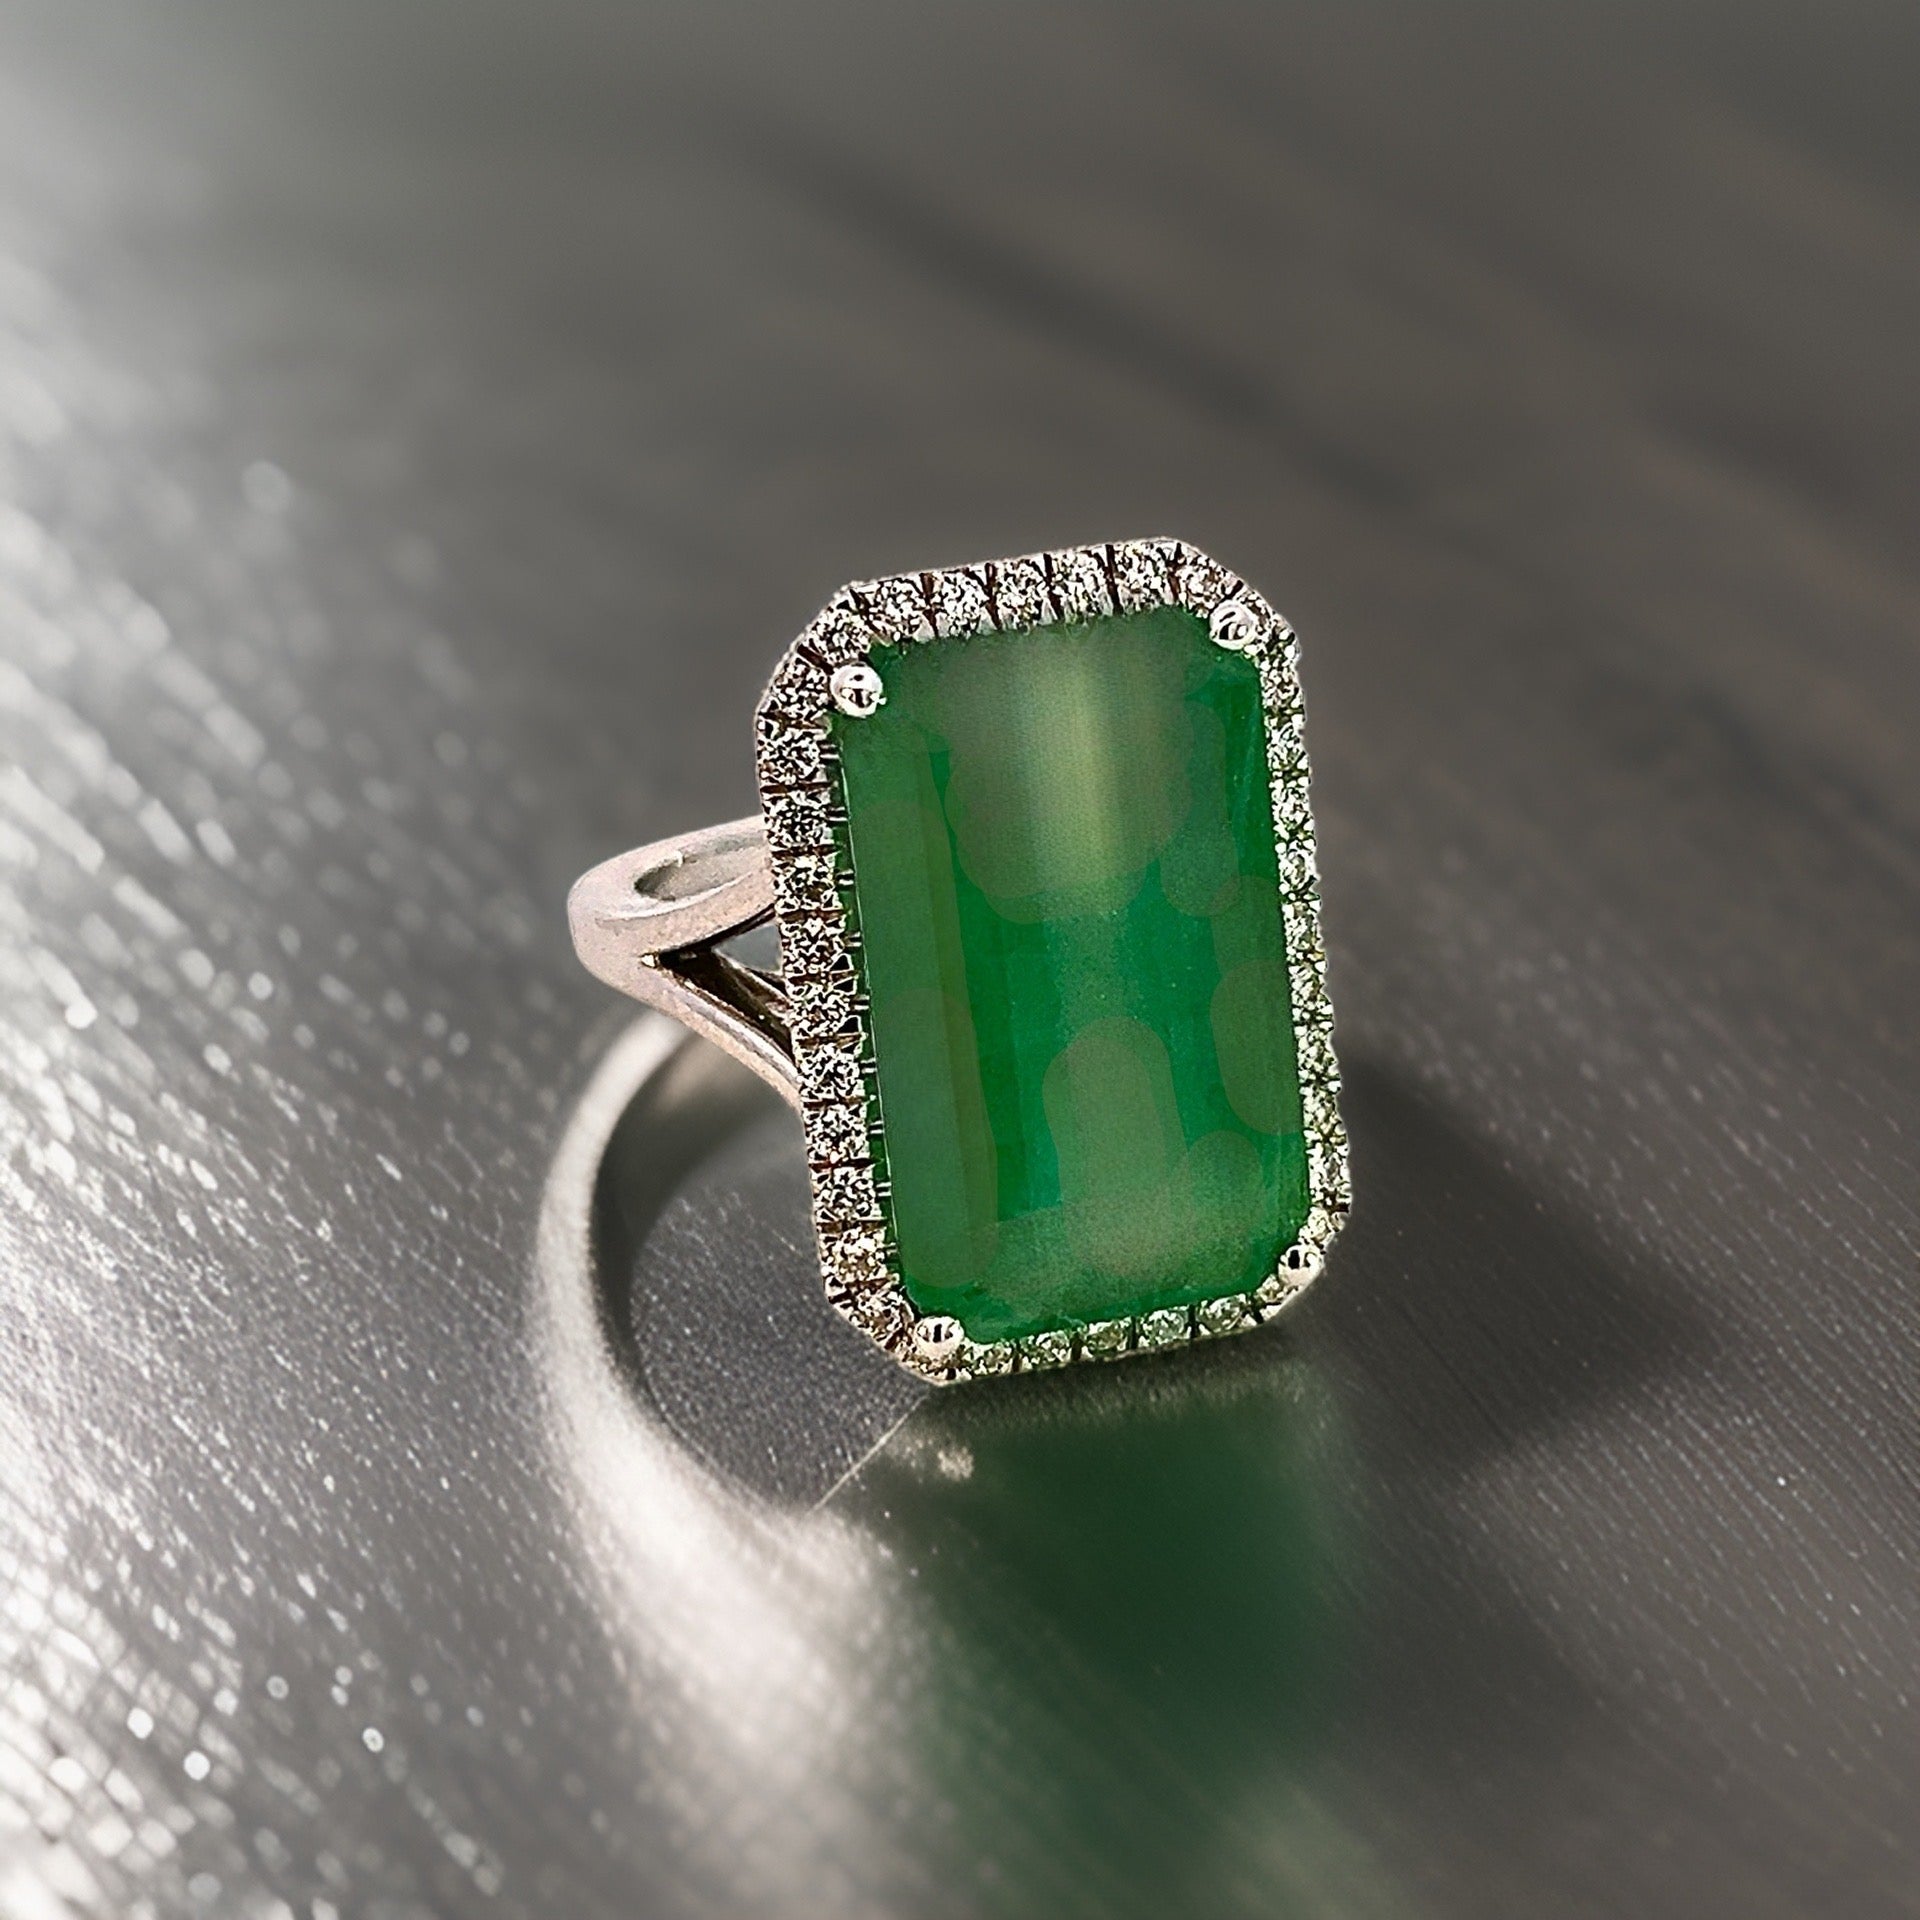 Natural Emerald Diamond Ring 6.5 14k White Gold 12.08 TCW Certified $5,950 311005 - Certified Fine Jewelry